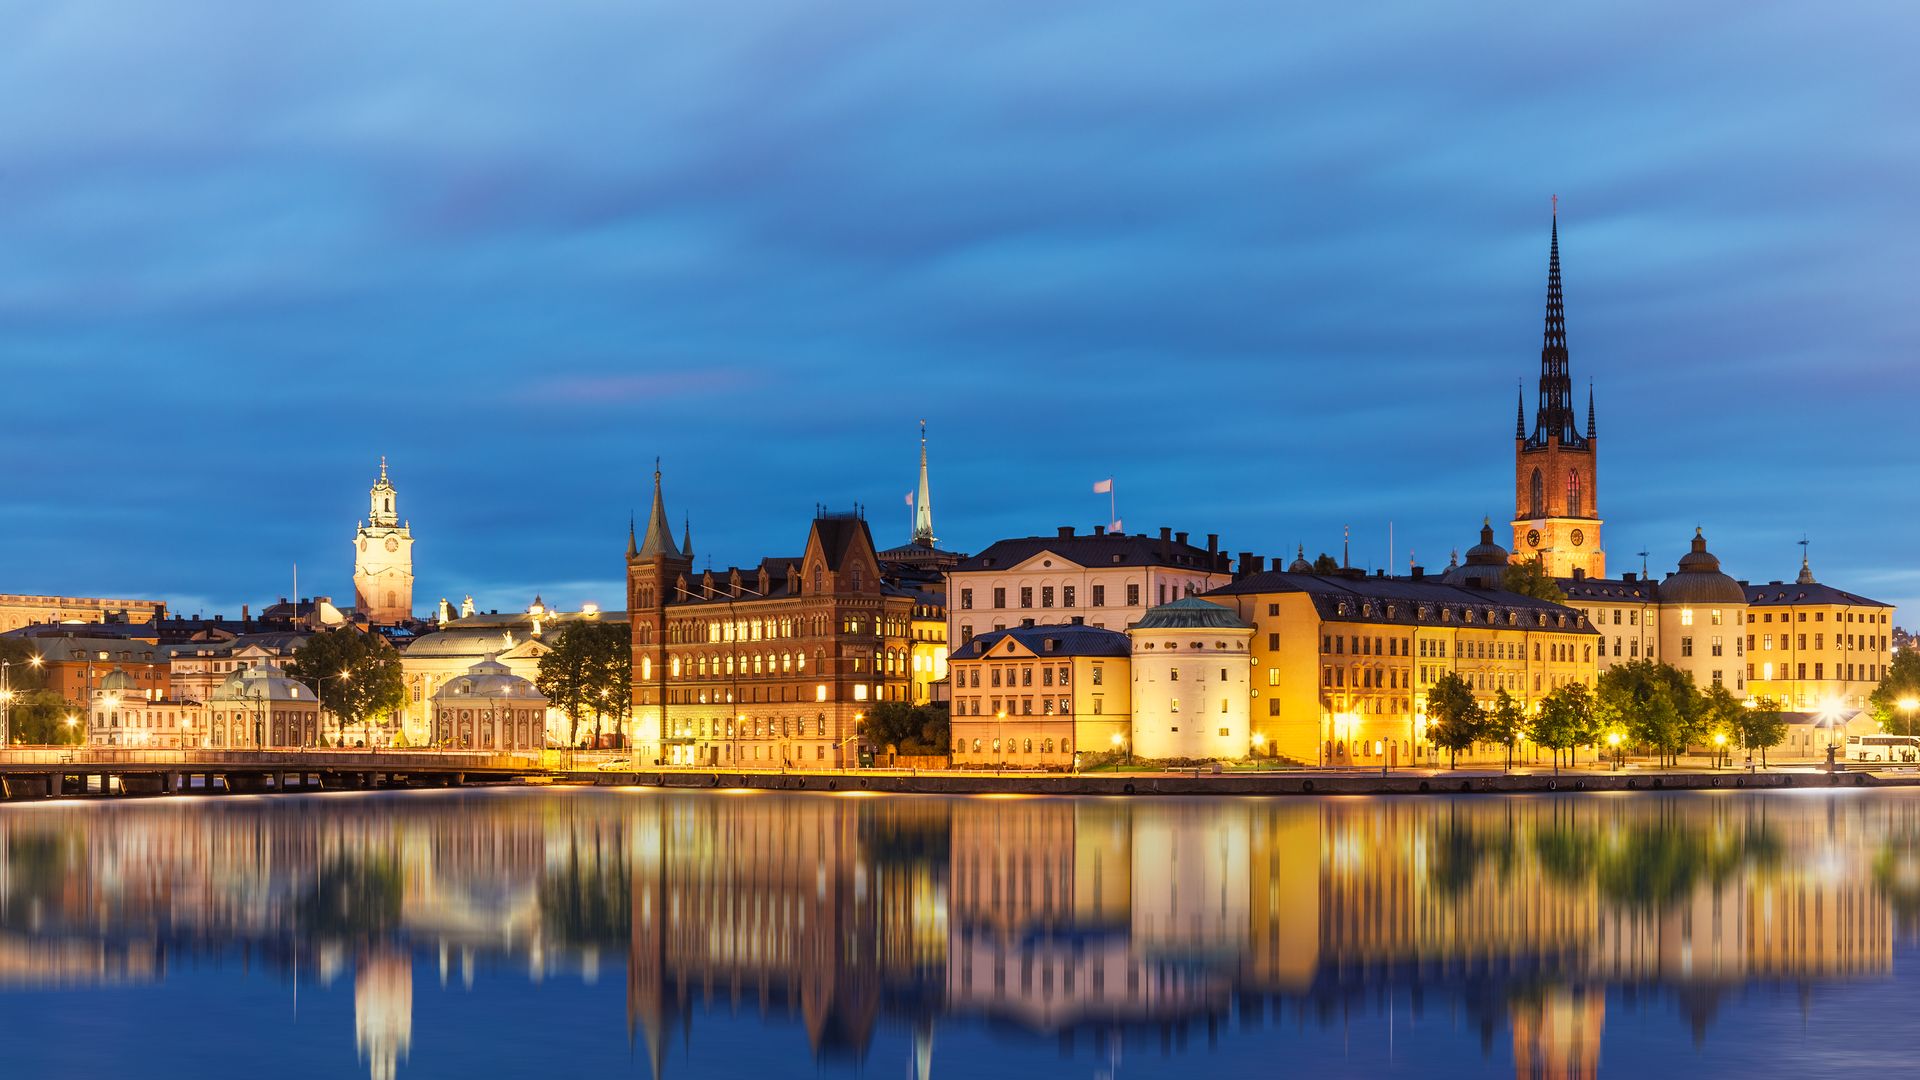 The Gamla Stan area of Stockholm